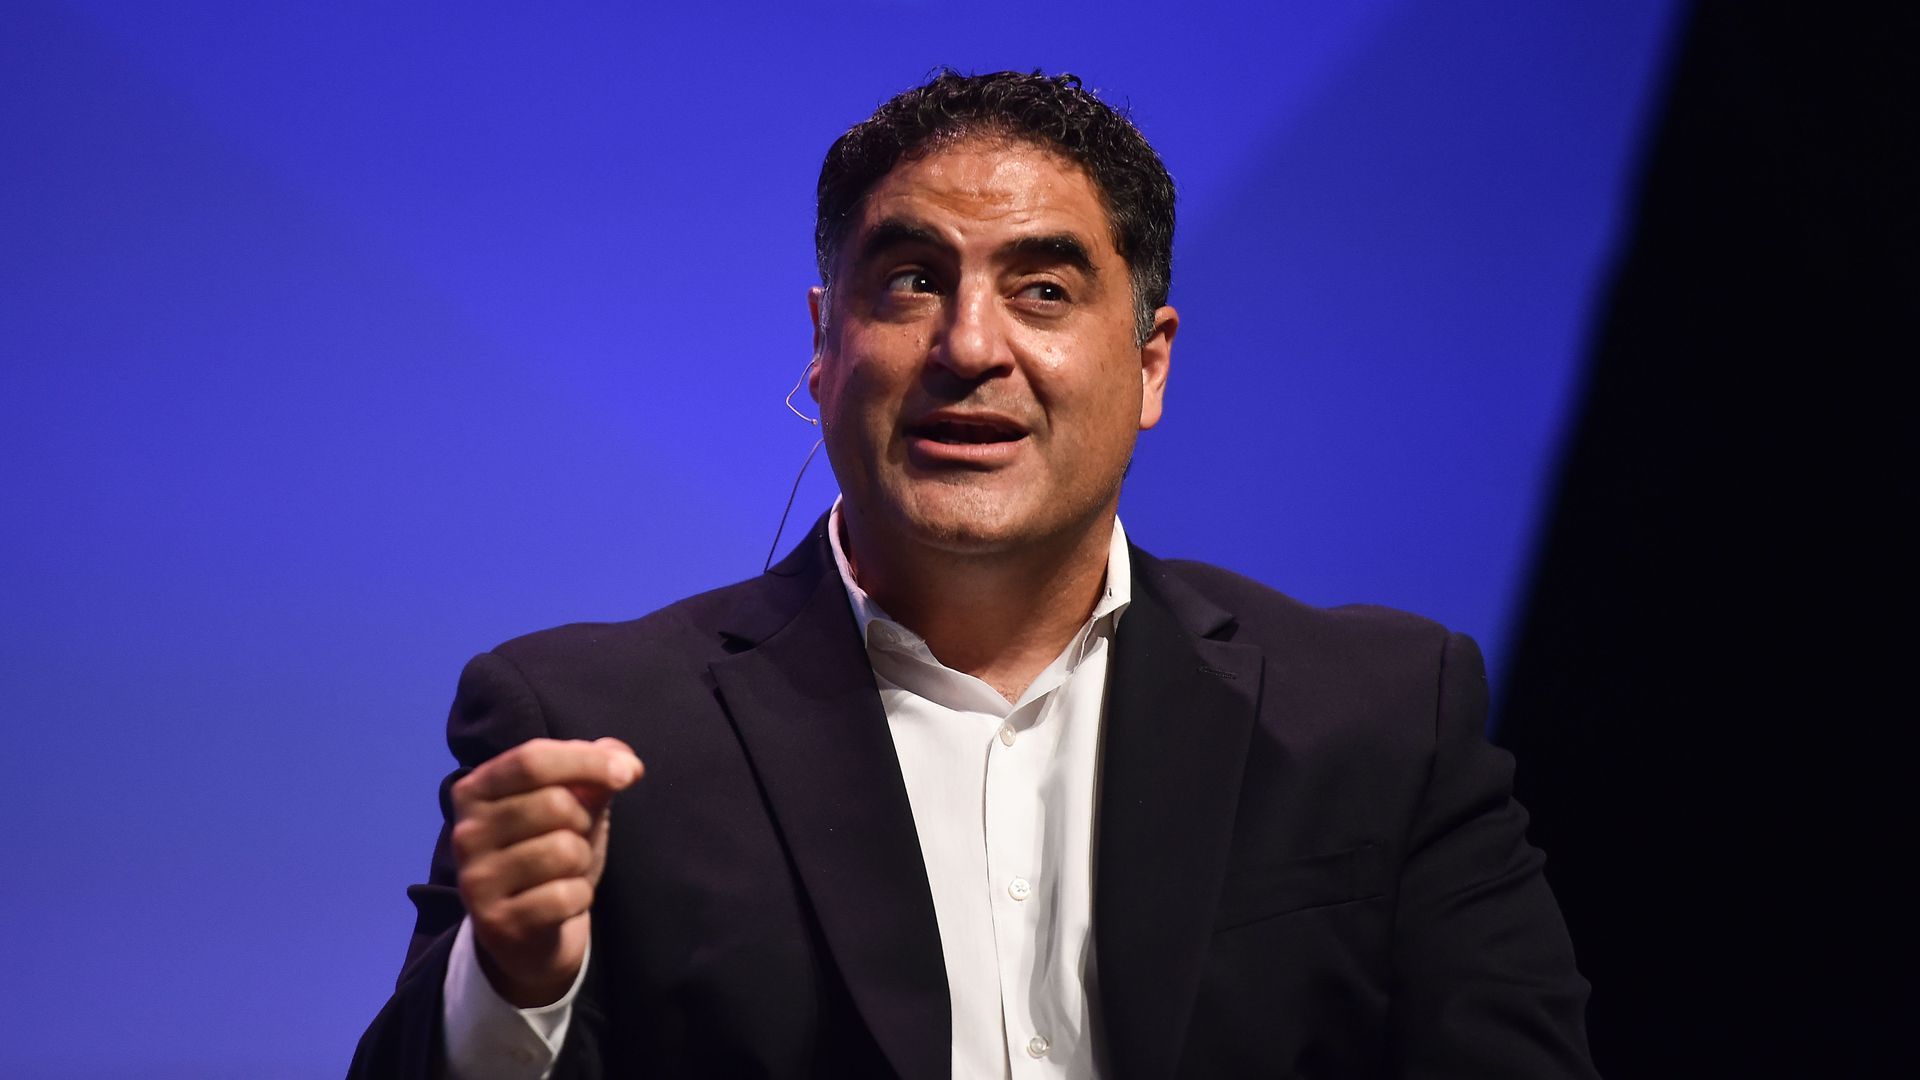 The Young Turks' Cenk Uygur